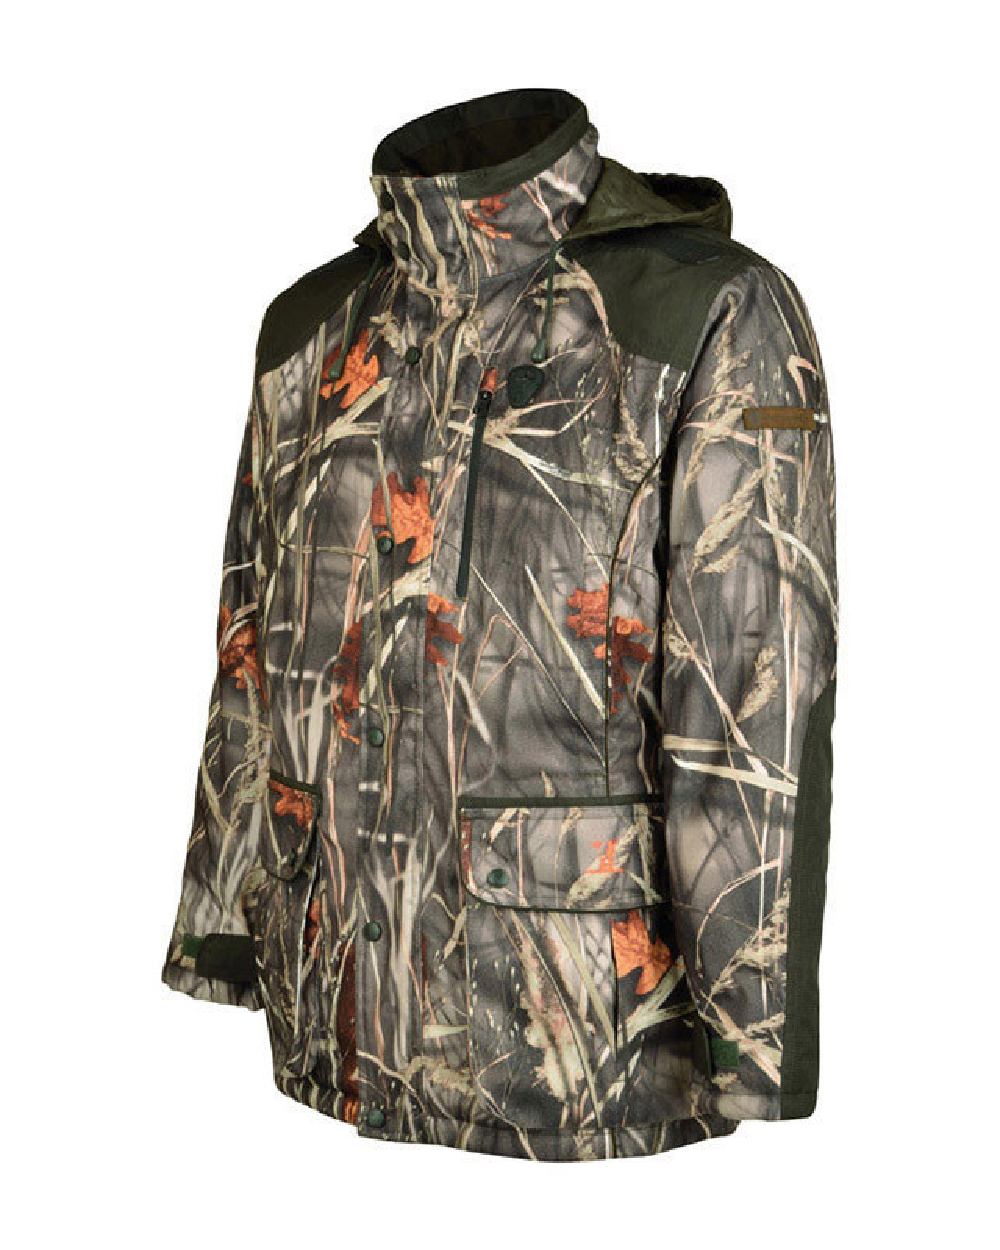 Percussion Brocard Ghostcamo Jacket in Wet 